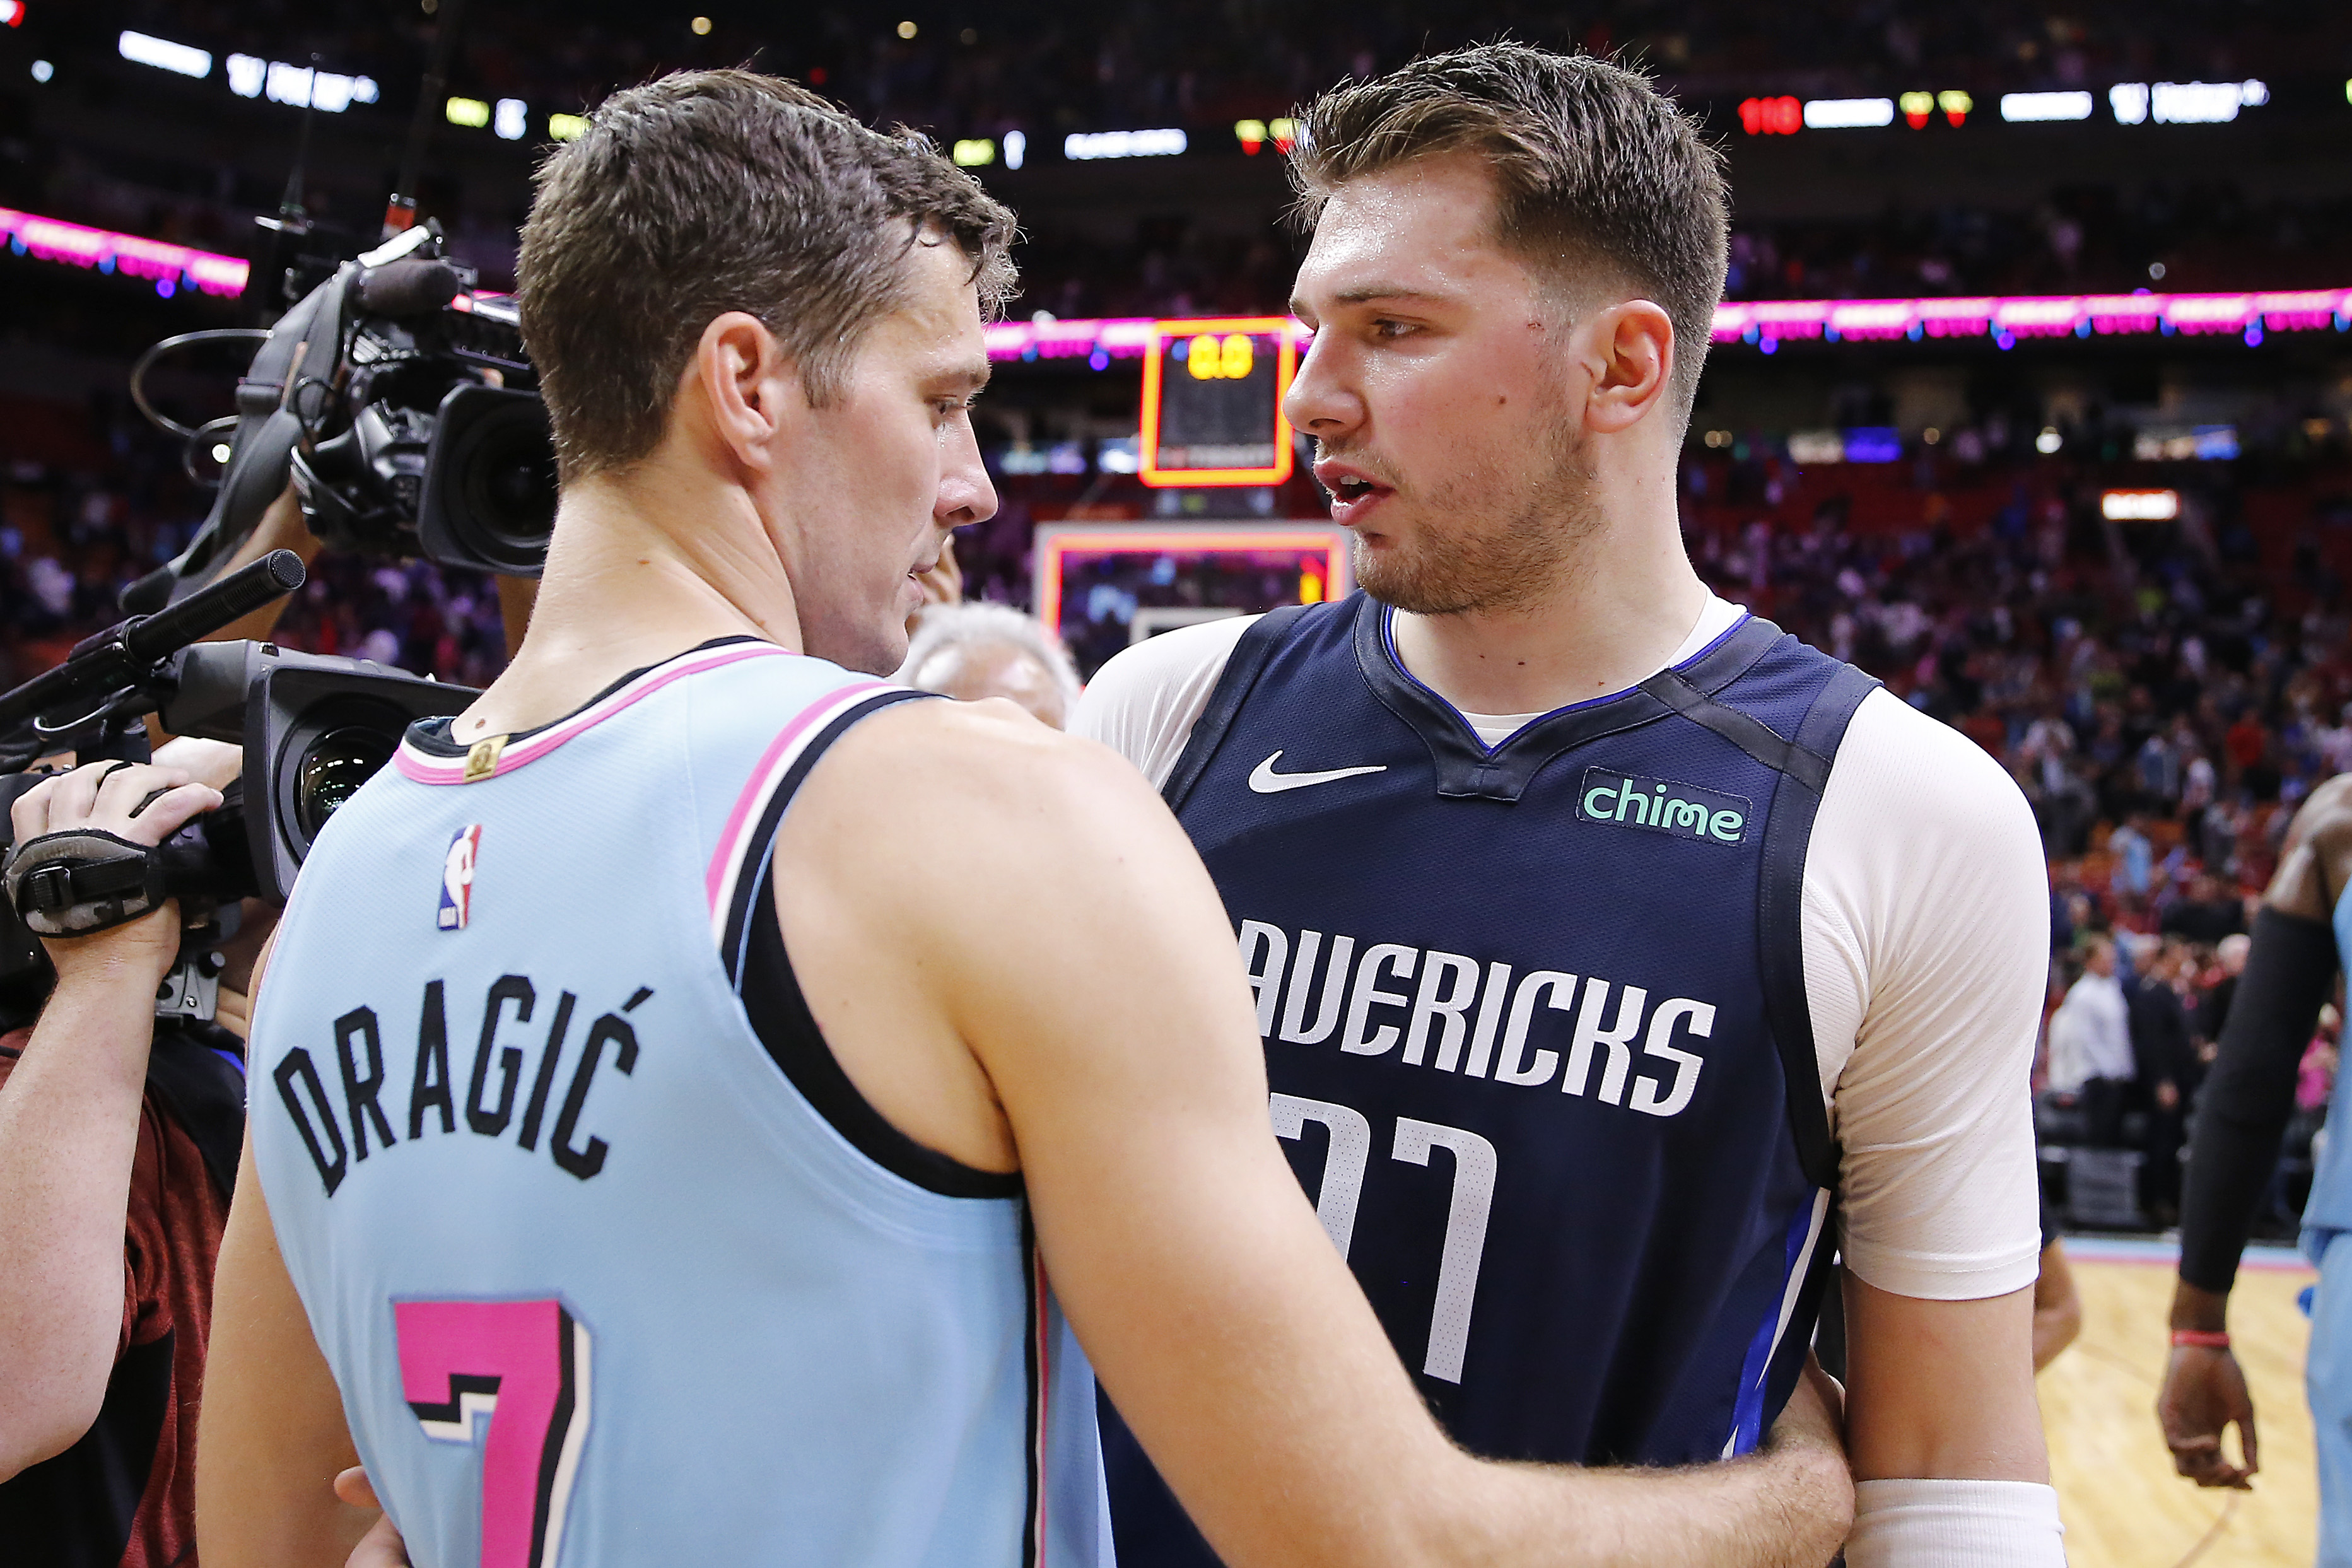 Luka Doncic and Goran Dragic embrace after the Dallas Mavericks played the Miami Heat last February